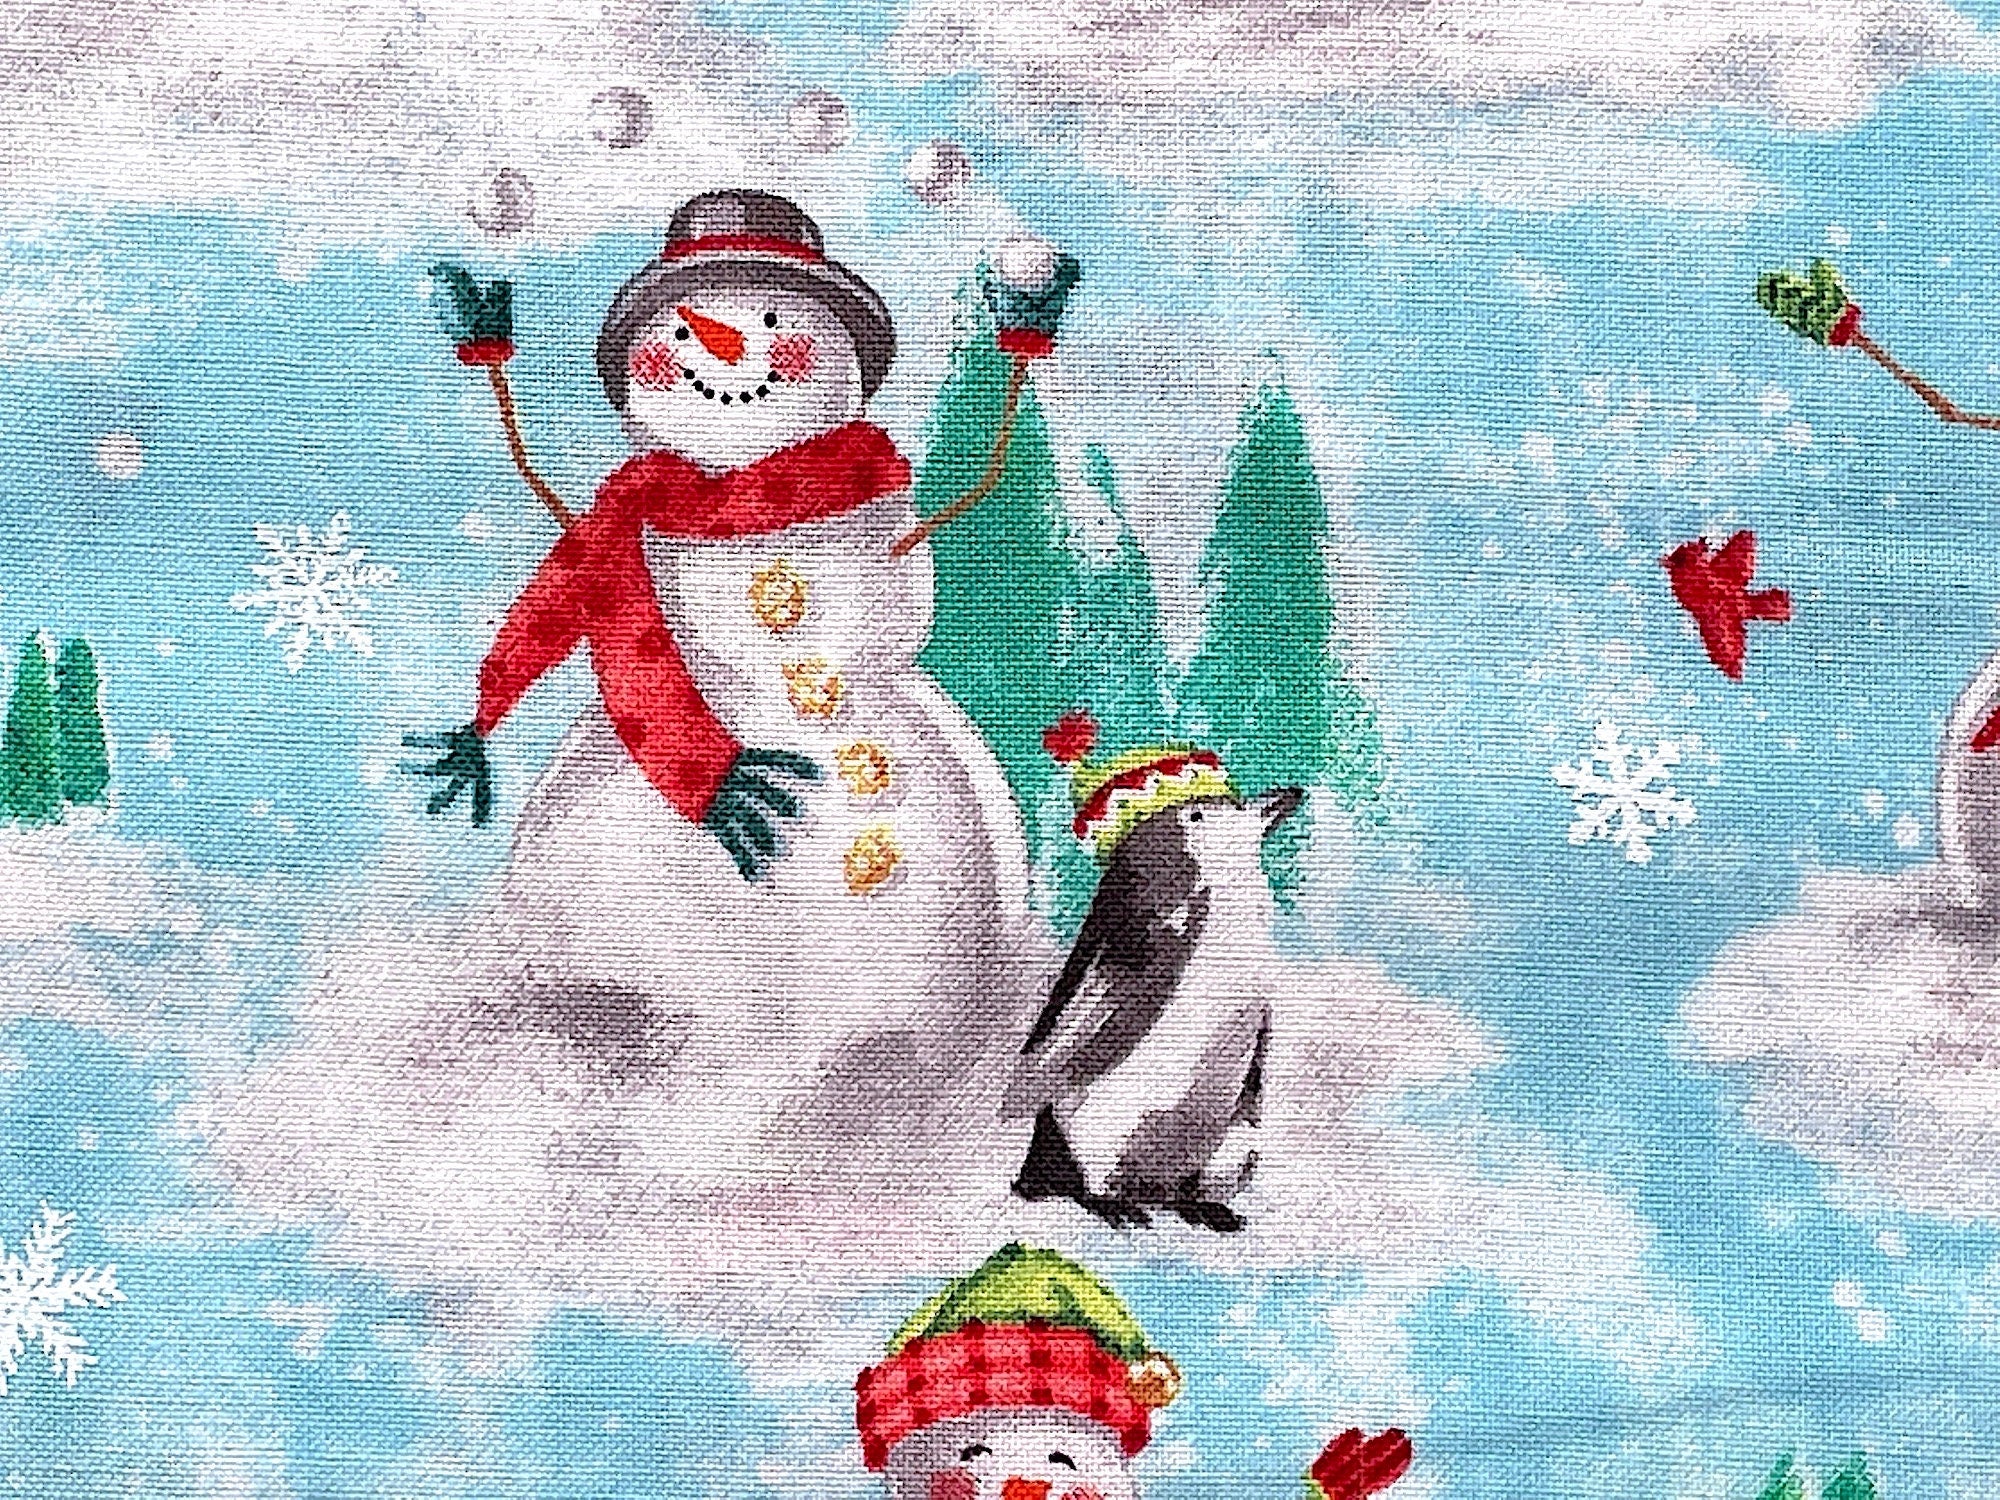 Close up of a snowman tossing snowballs while a penguin stands beside him.